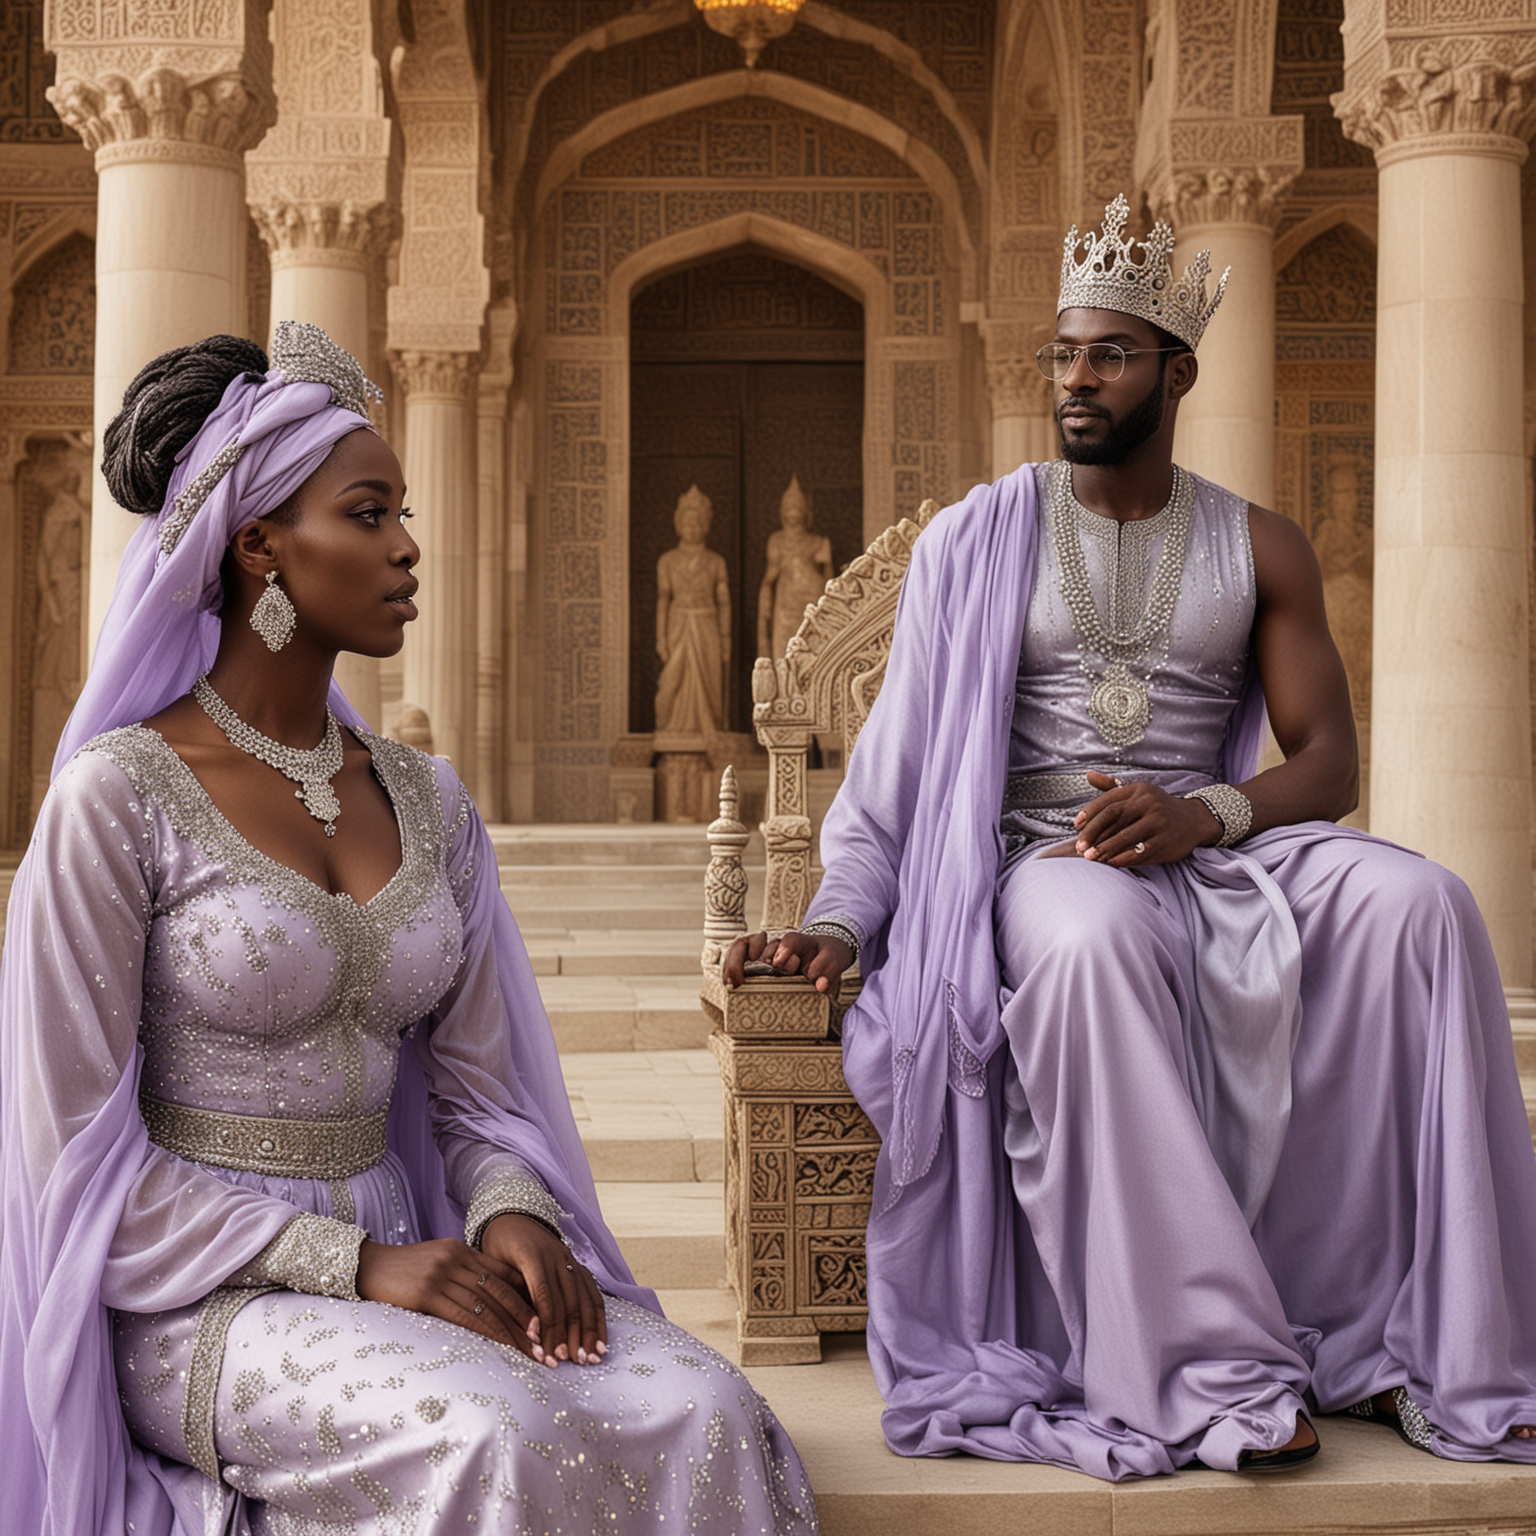 Persian Black King and Queen Addressing Subjects in Lavish Temple Scene